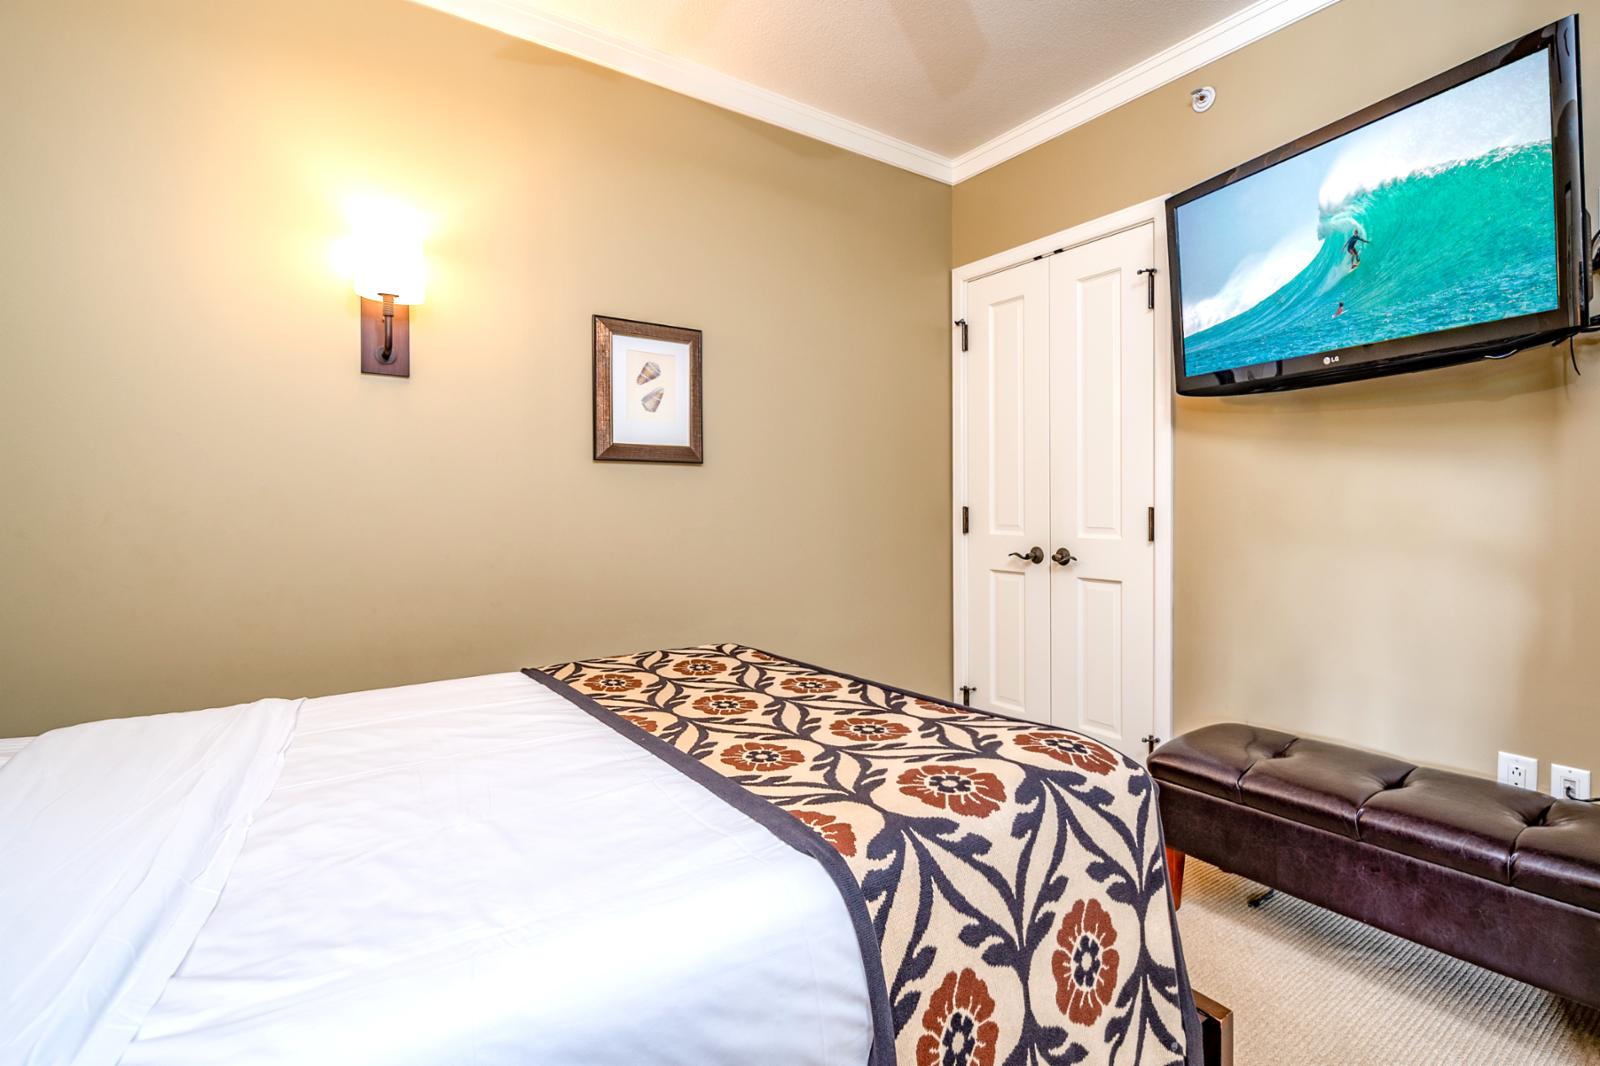 Large flatscreen television and ample storage available in room, privacy doors a must!